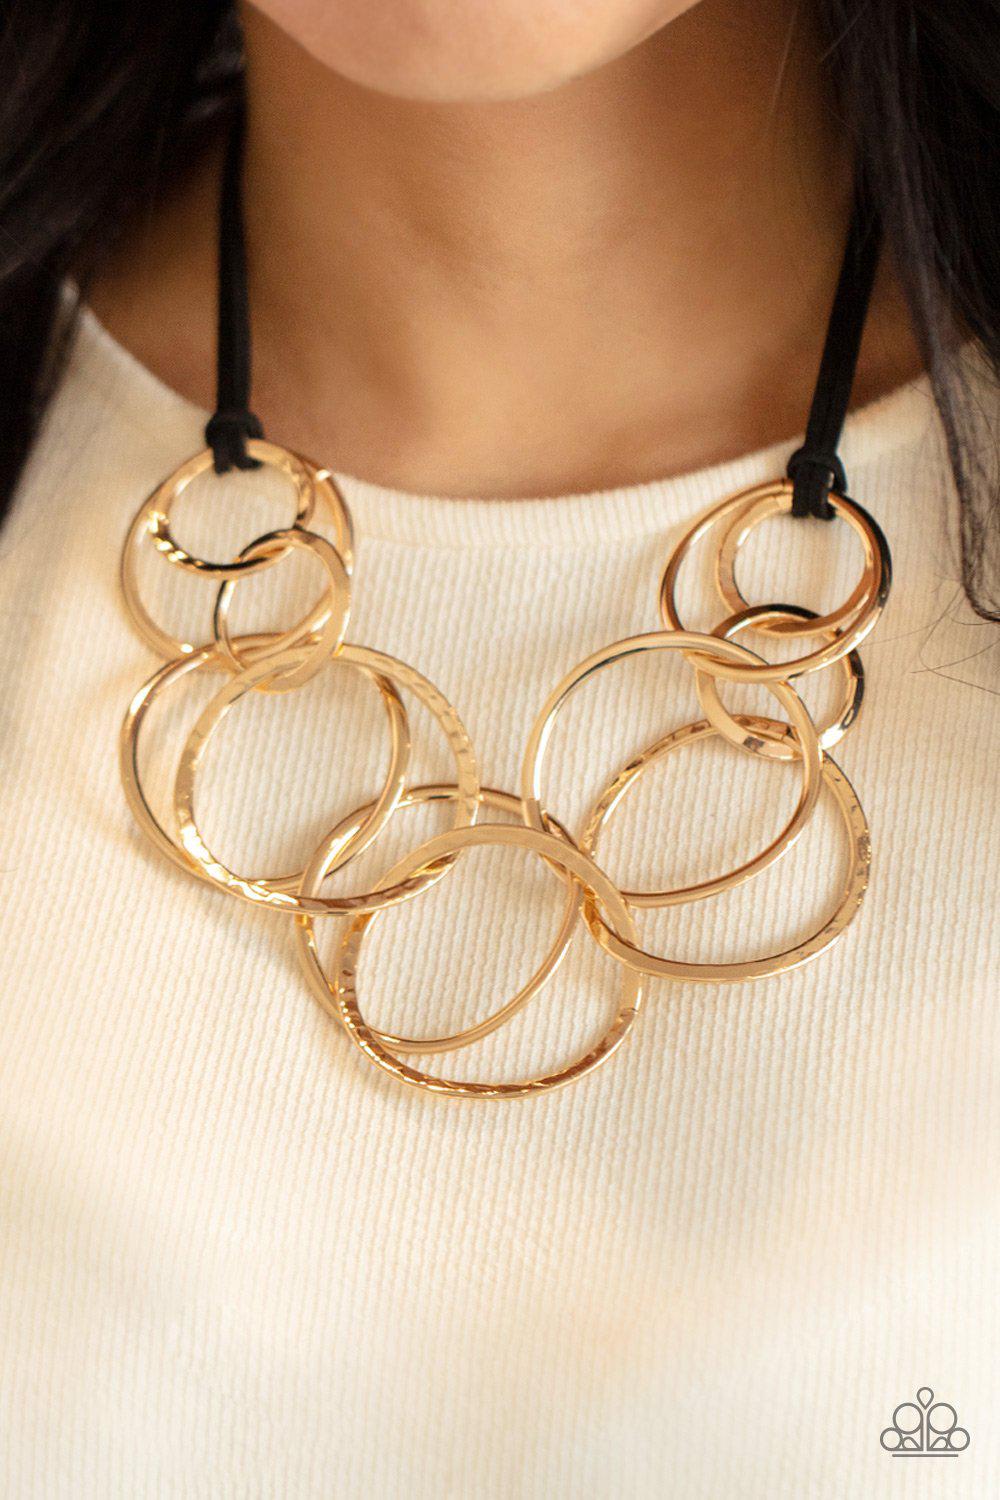 Spiraling Out of COUTURE Gold and Black Suede Necklace - Paparazzi Accessories 2021 Convention Exclusive- model - CarasShop.com - $5 Jewelry by Cara Jewels